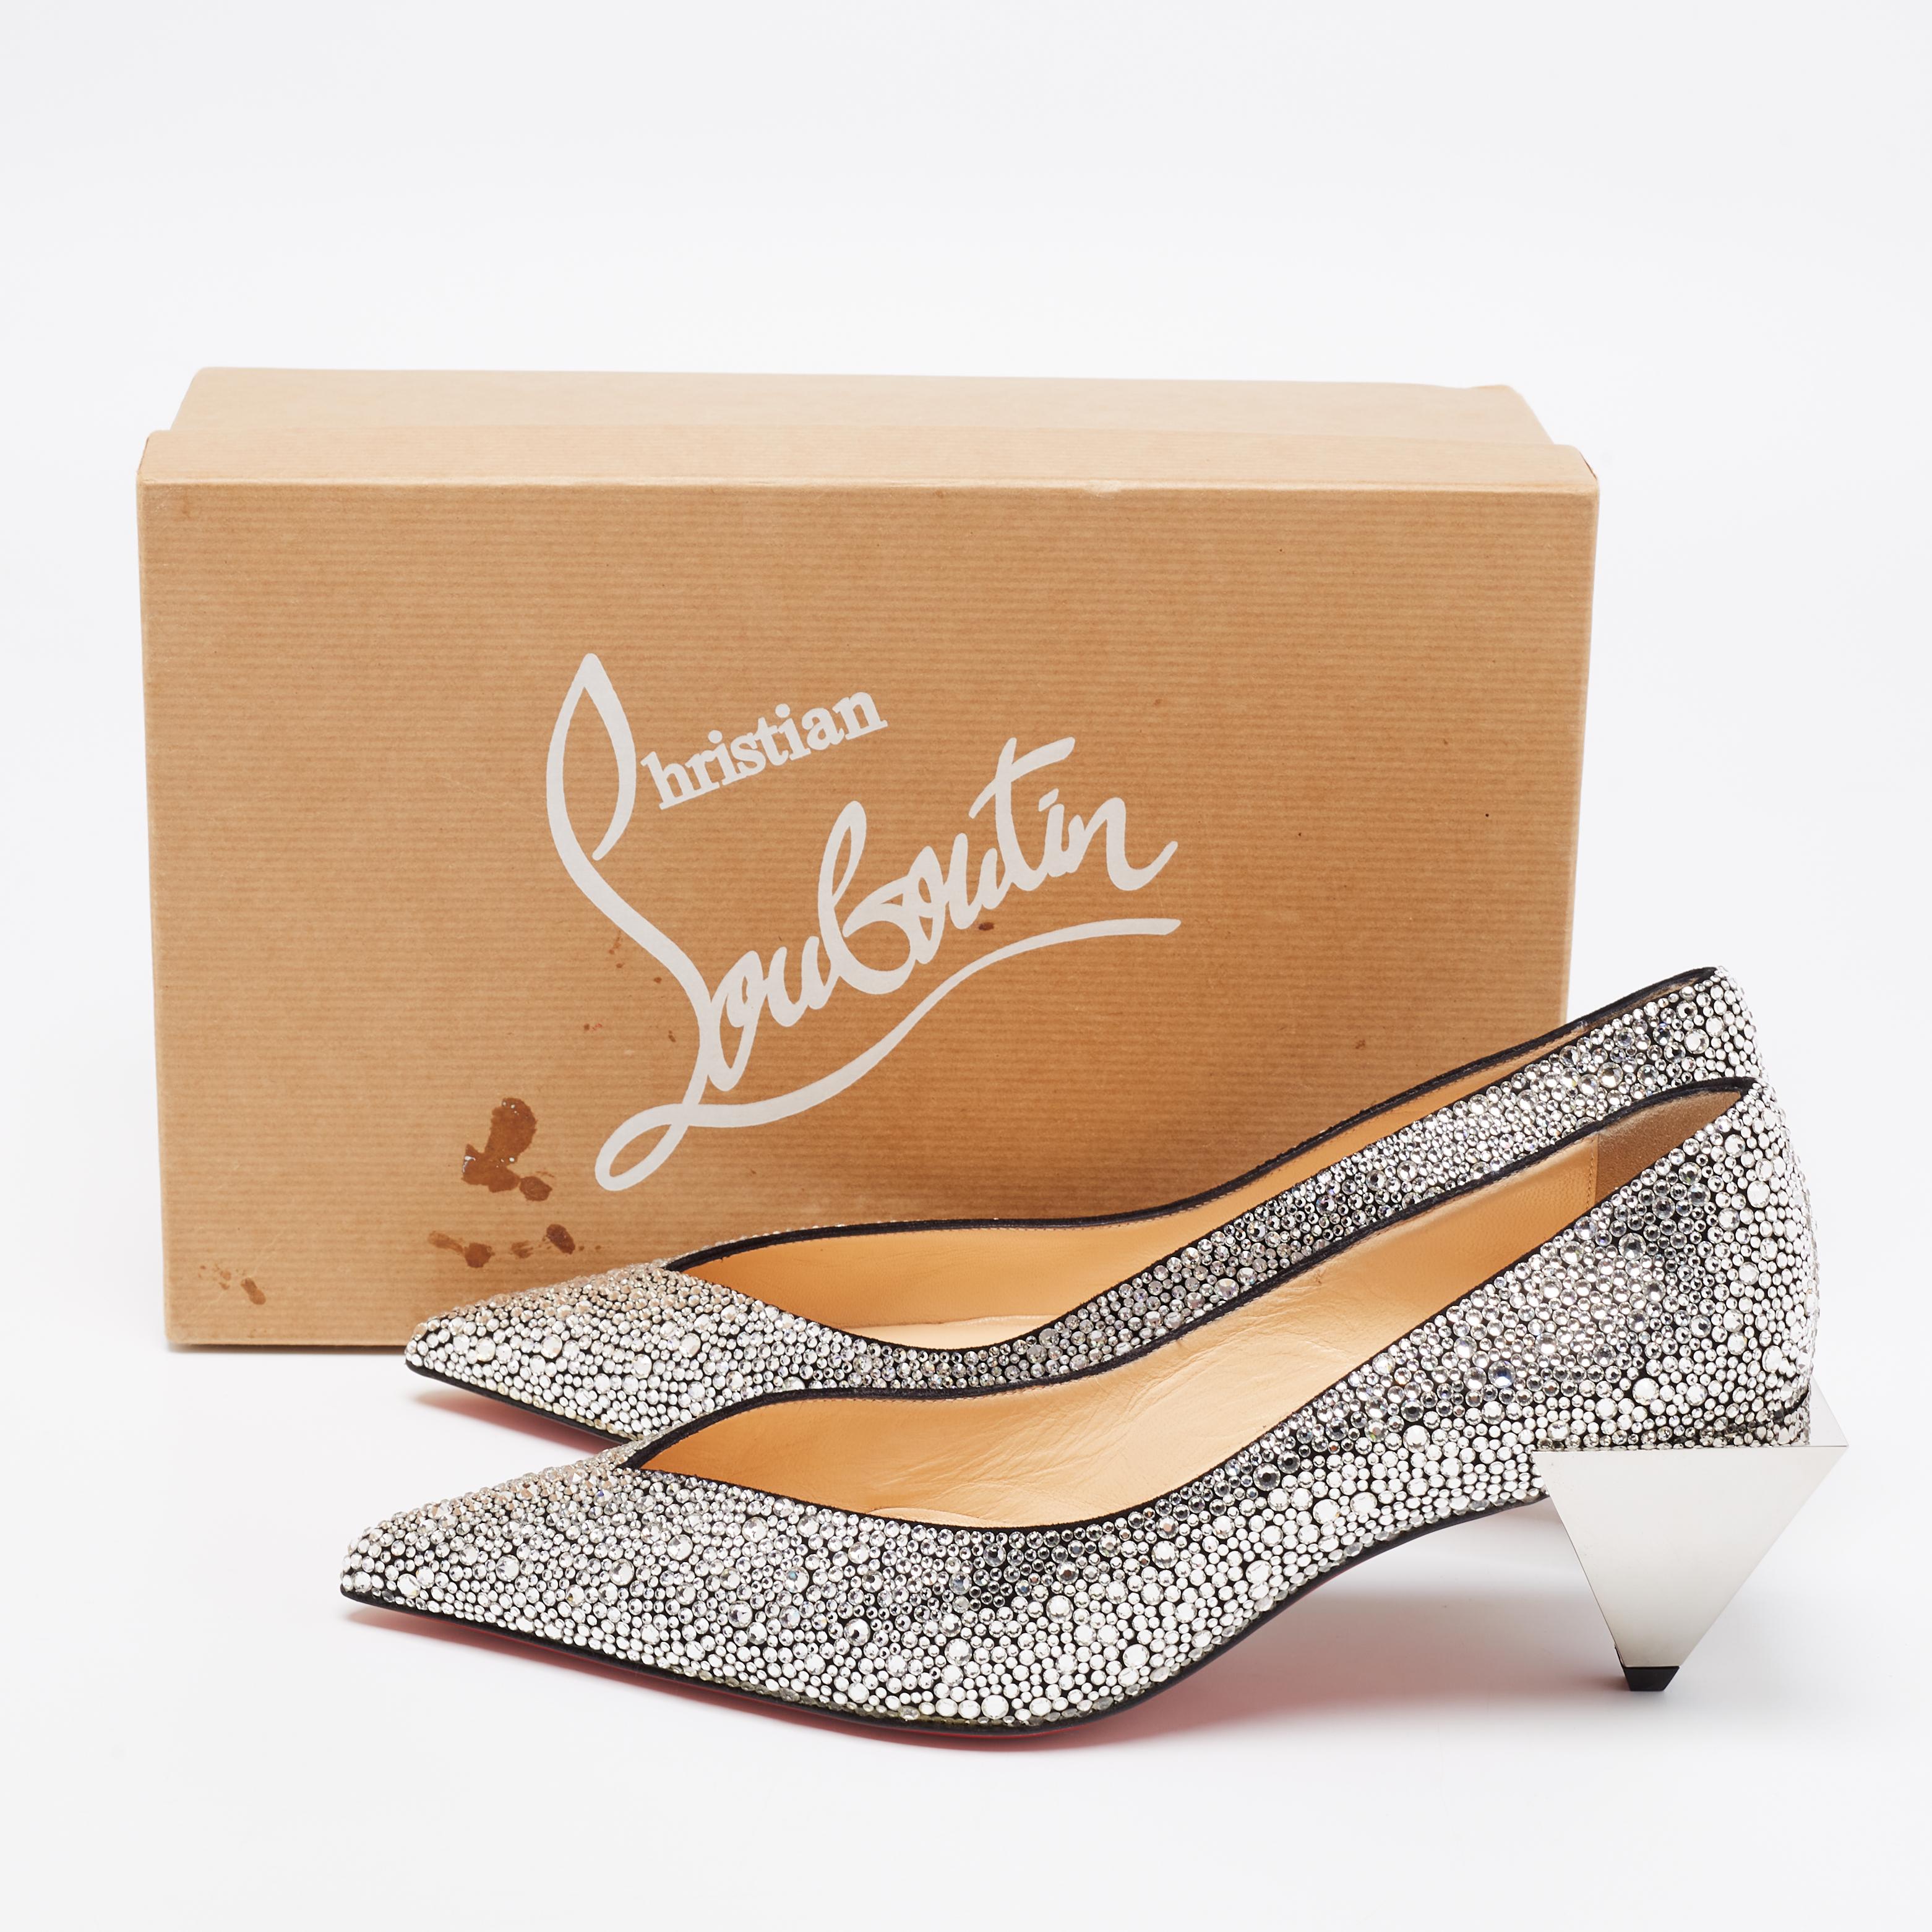 Christian Louboutin Silver Suede Galaxister Strass Pumps Size 37 For Sale 5